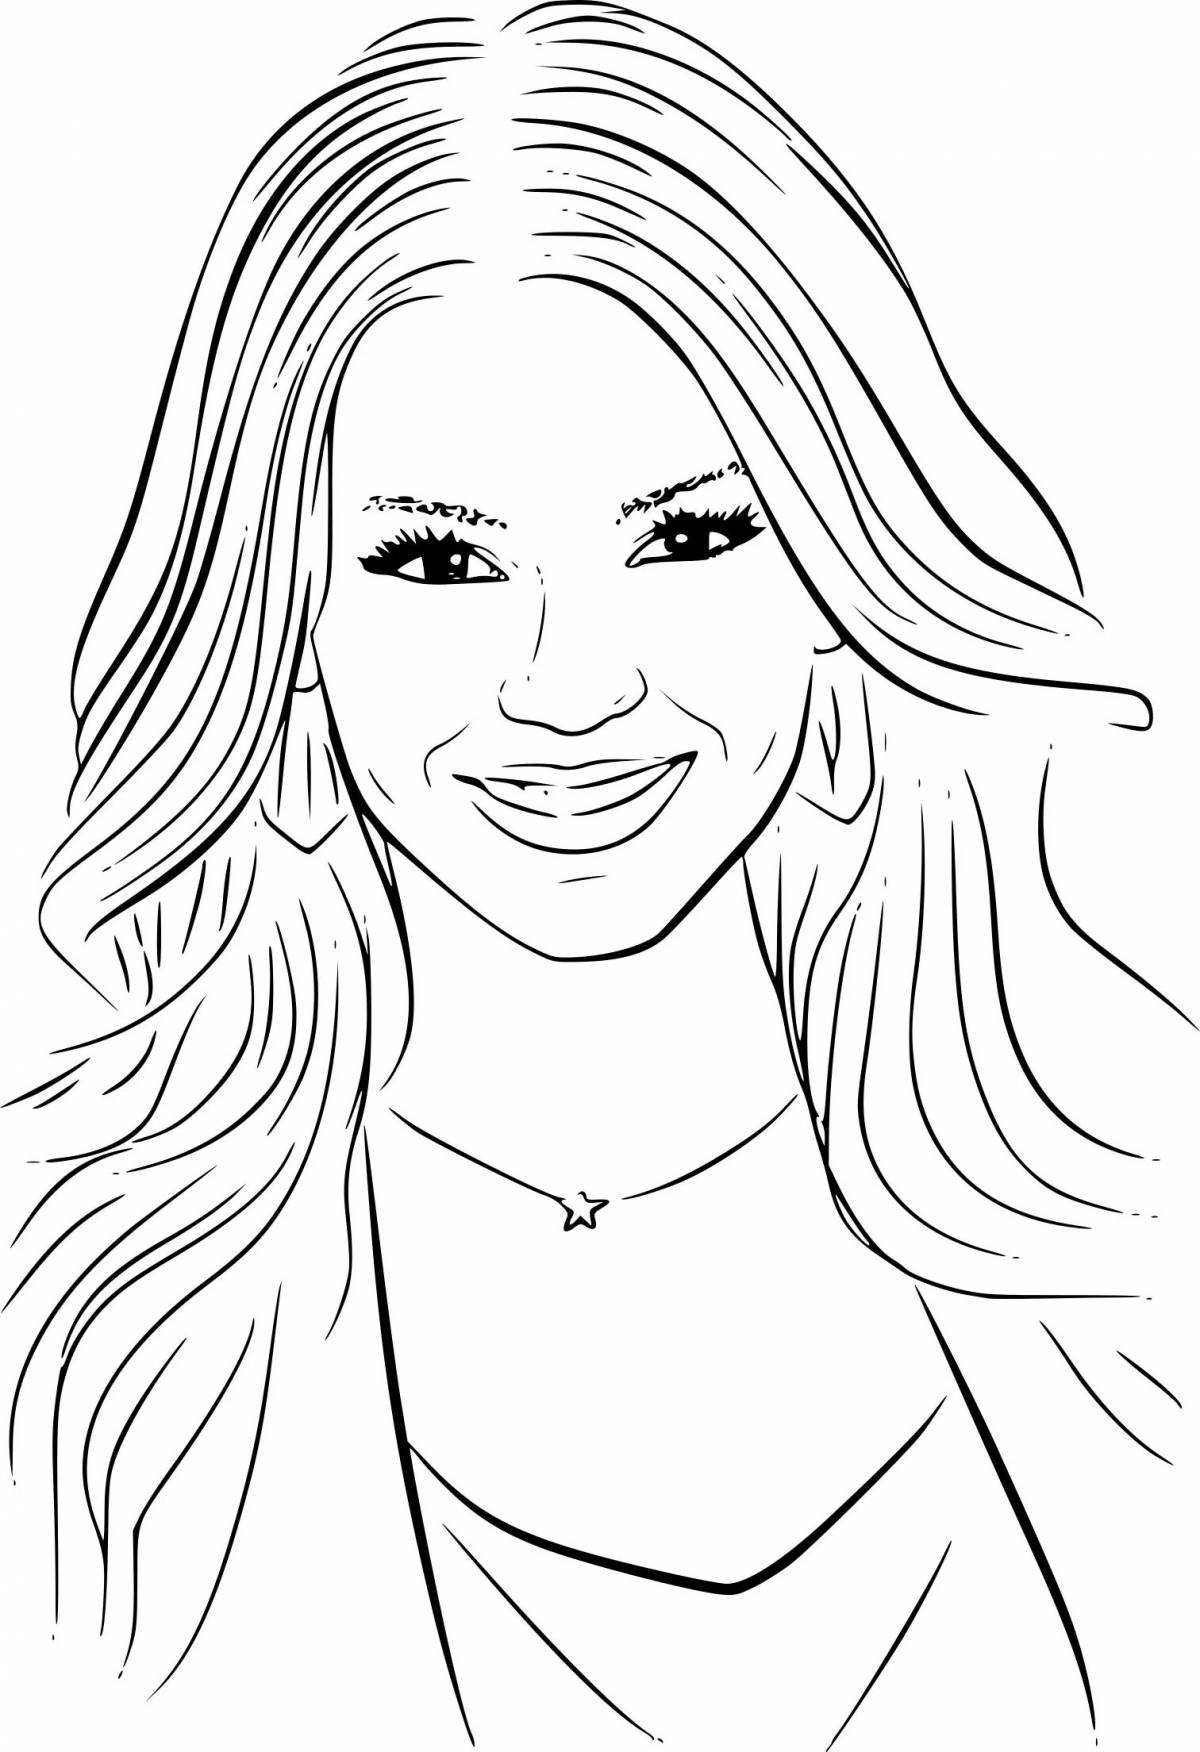 Miley Cyrus glowing coloring page